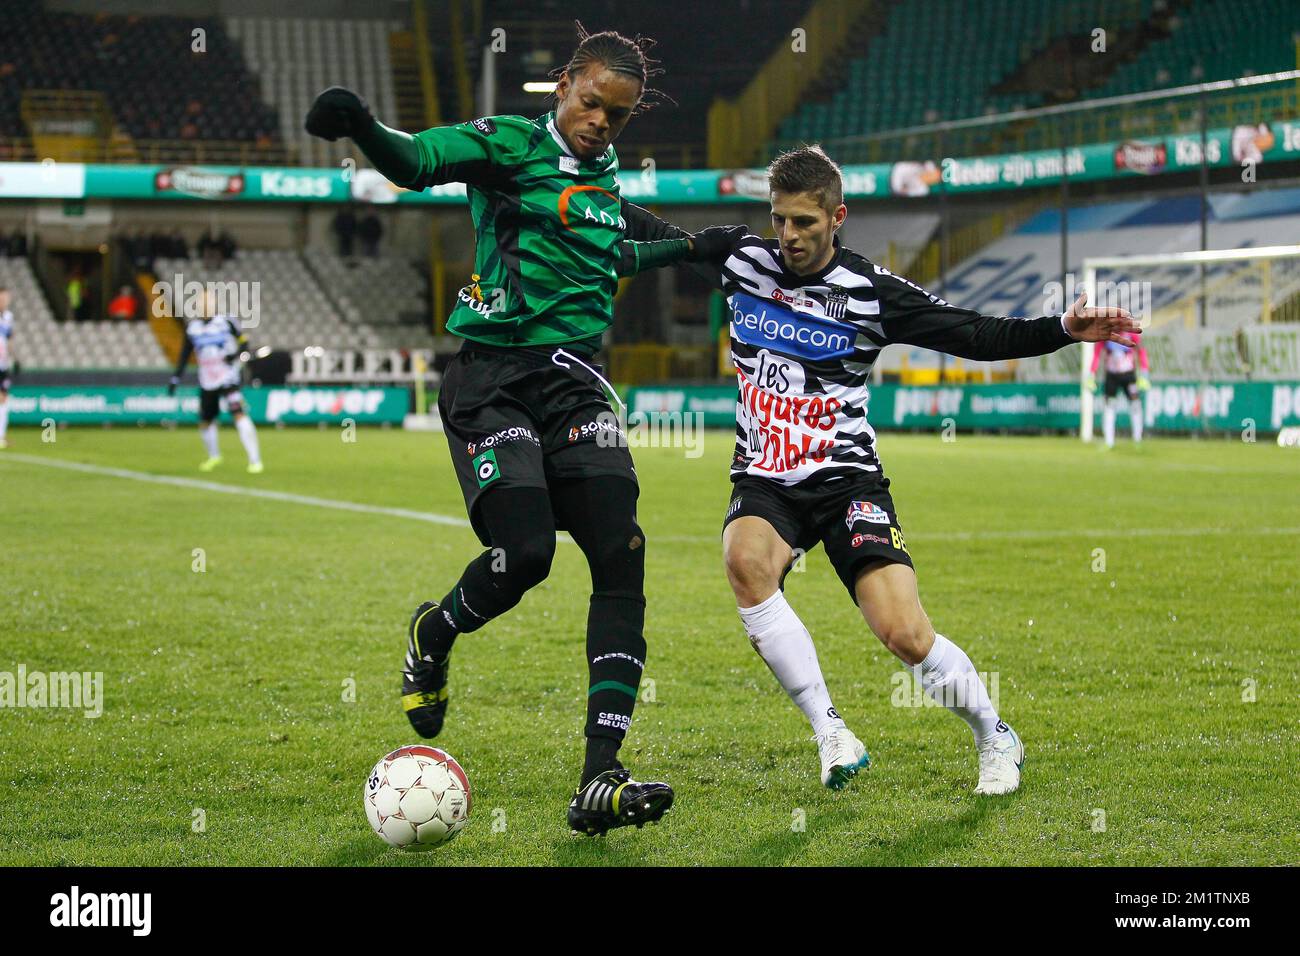 20140125 - BRUGGE, BELGIUM: Cercle's Michael Uchebo and Charleroi's Steeven Willems fight for the ball during the Jupiler Pro League match between Cercle Brugge and Charleroi, in Brugge, Saturday 25 January 2014, on day 23 of the Belgian soccer championship. BELGA PHOTO BRUNO FAHY Stock Photo